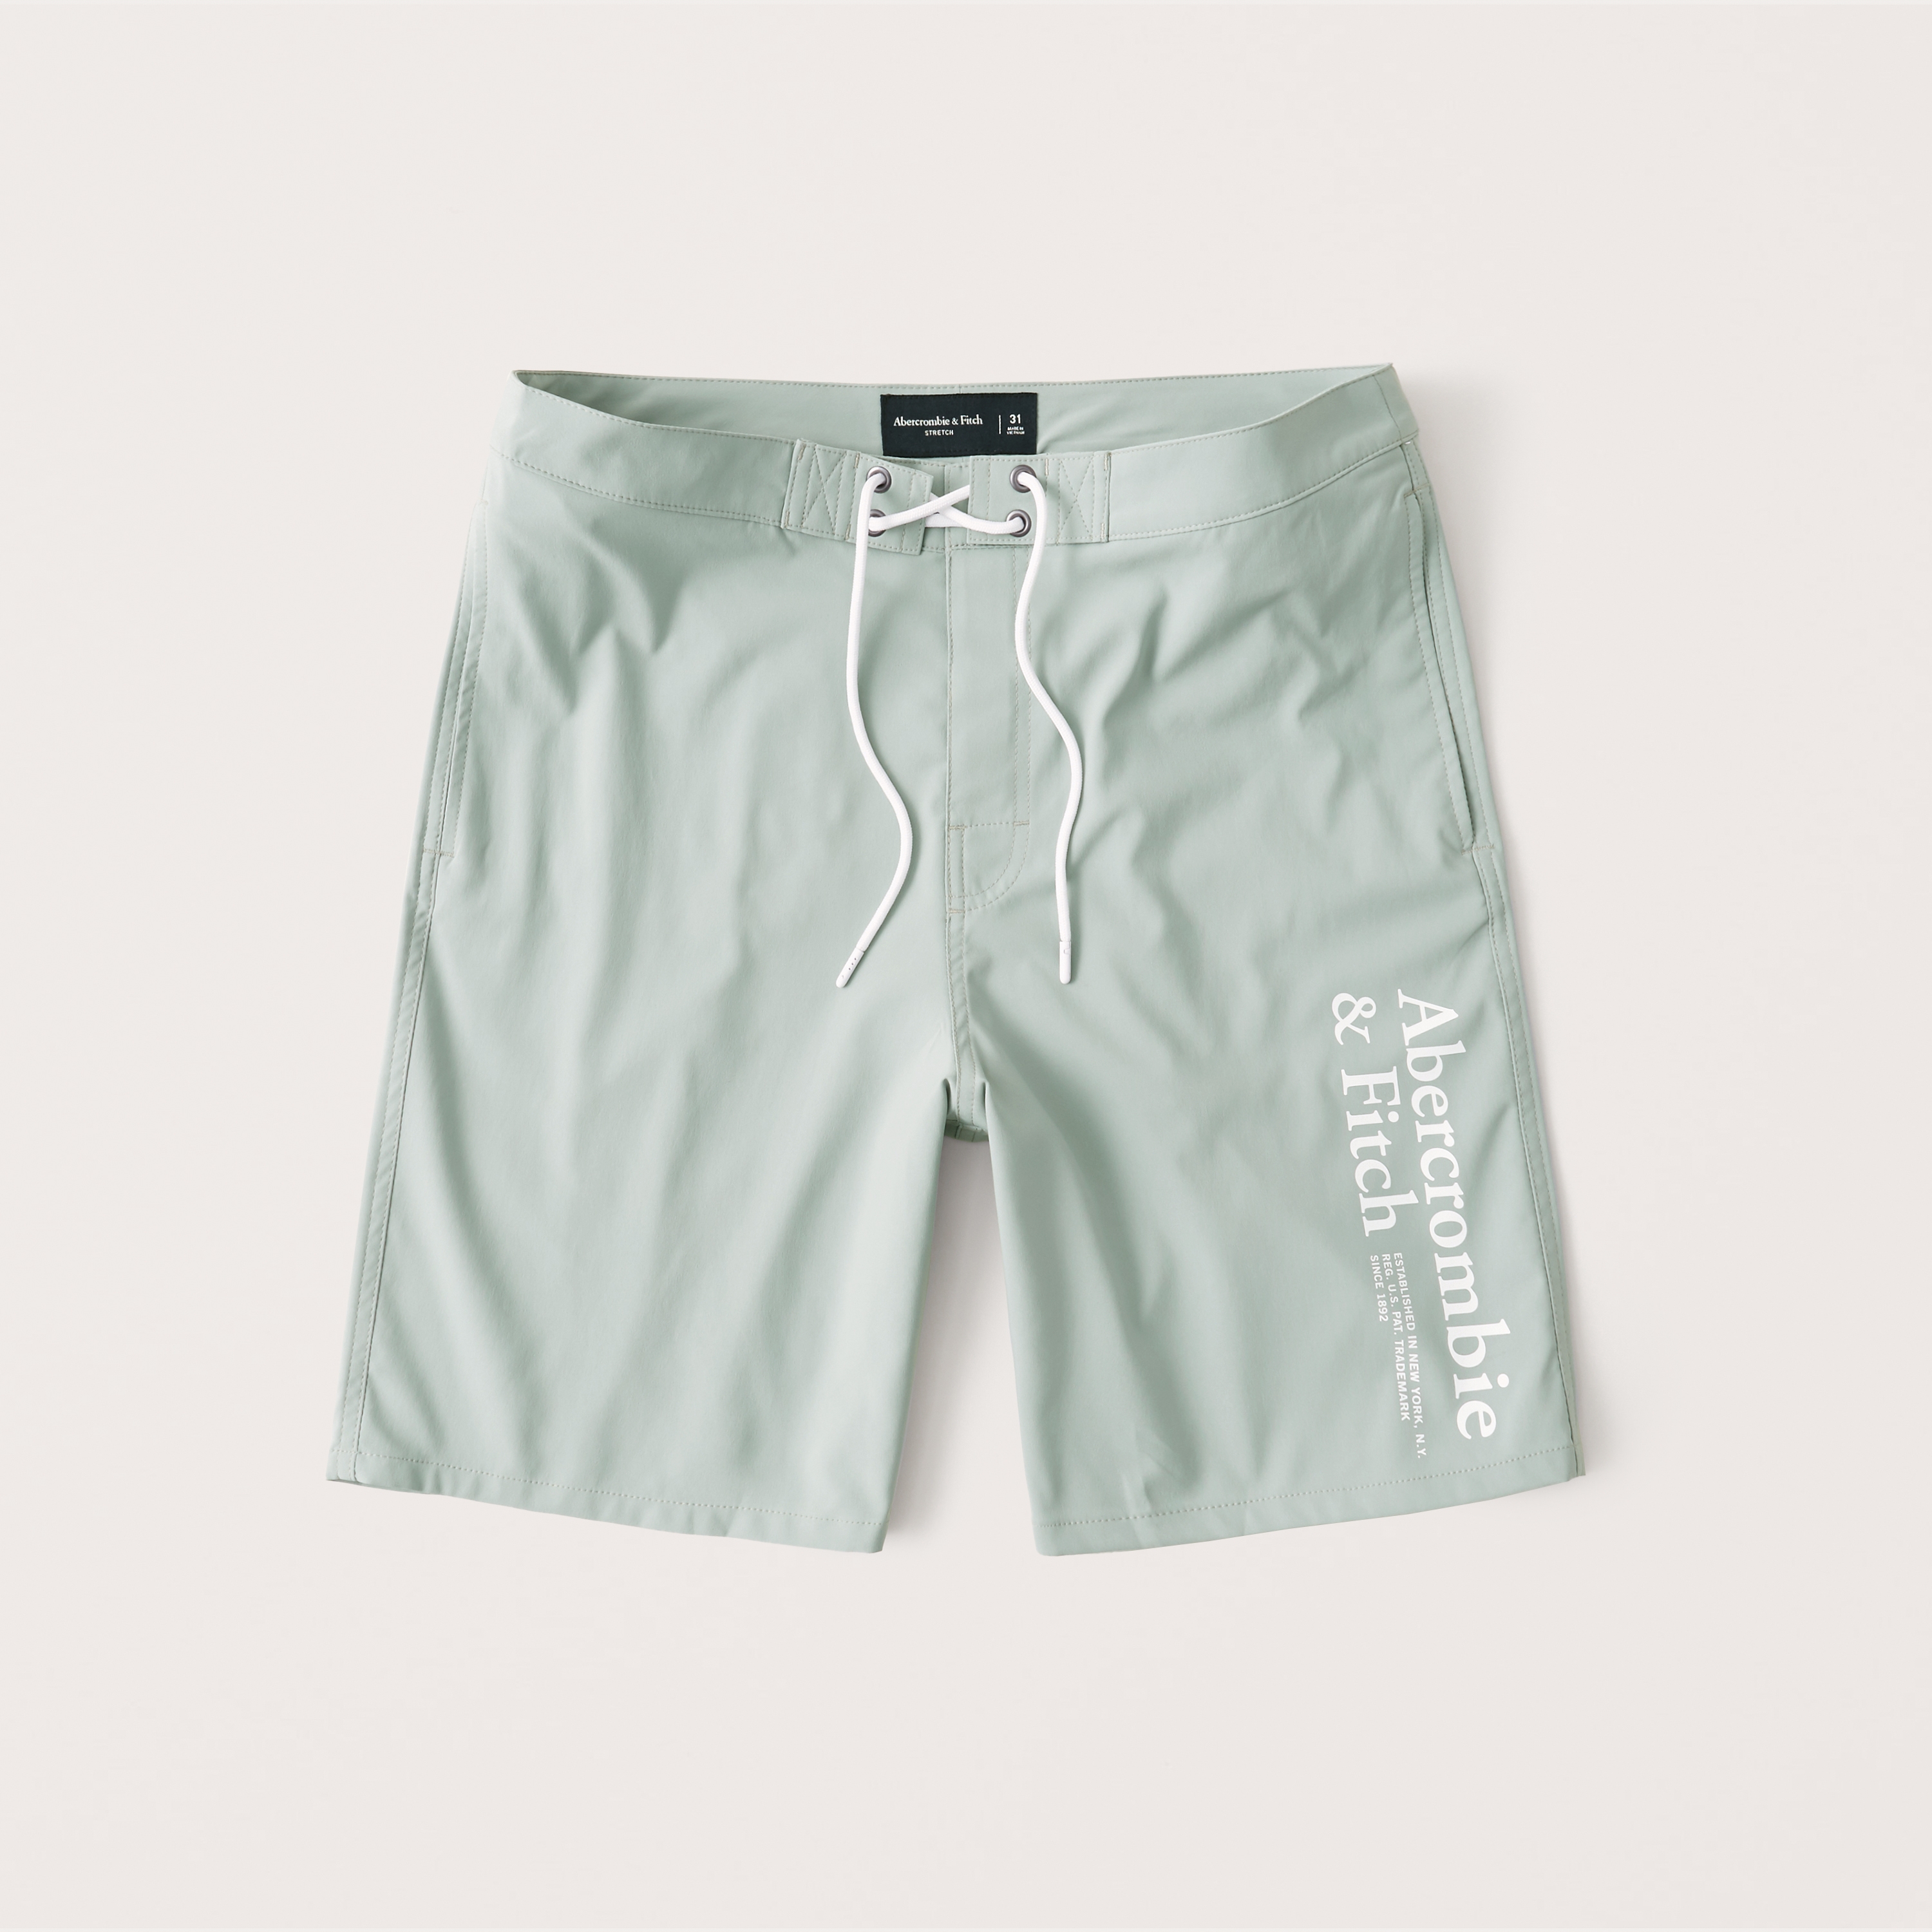 abercrombie and fitch badeshorts